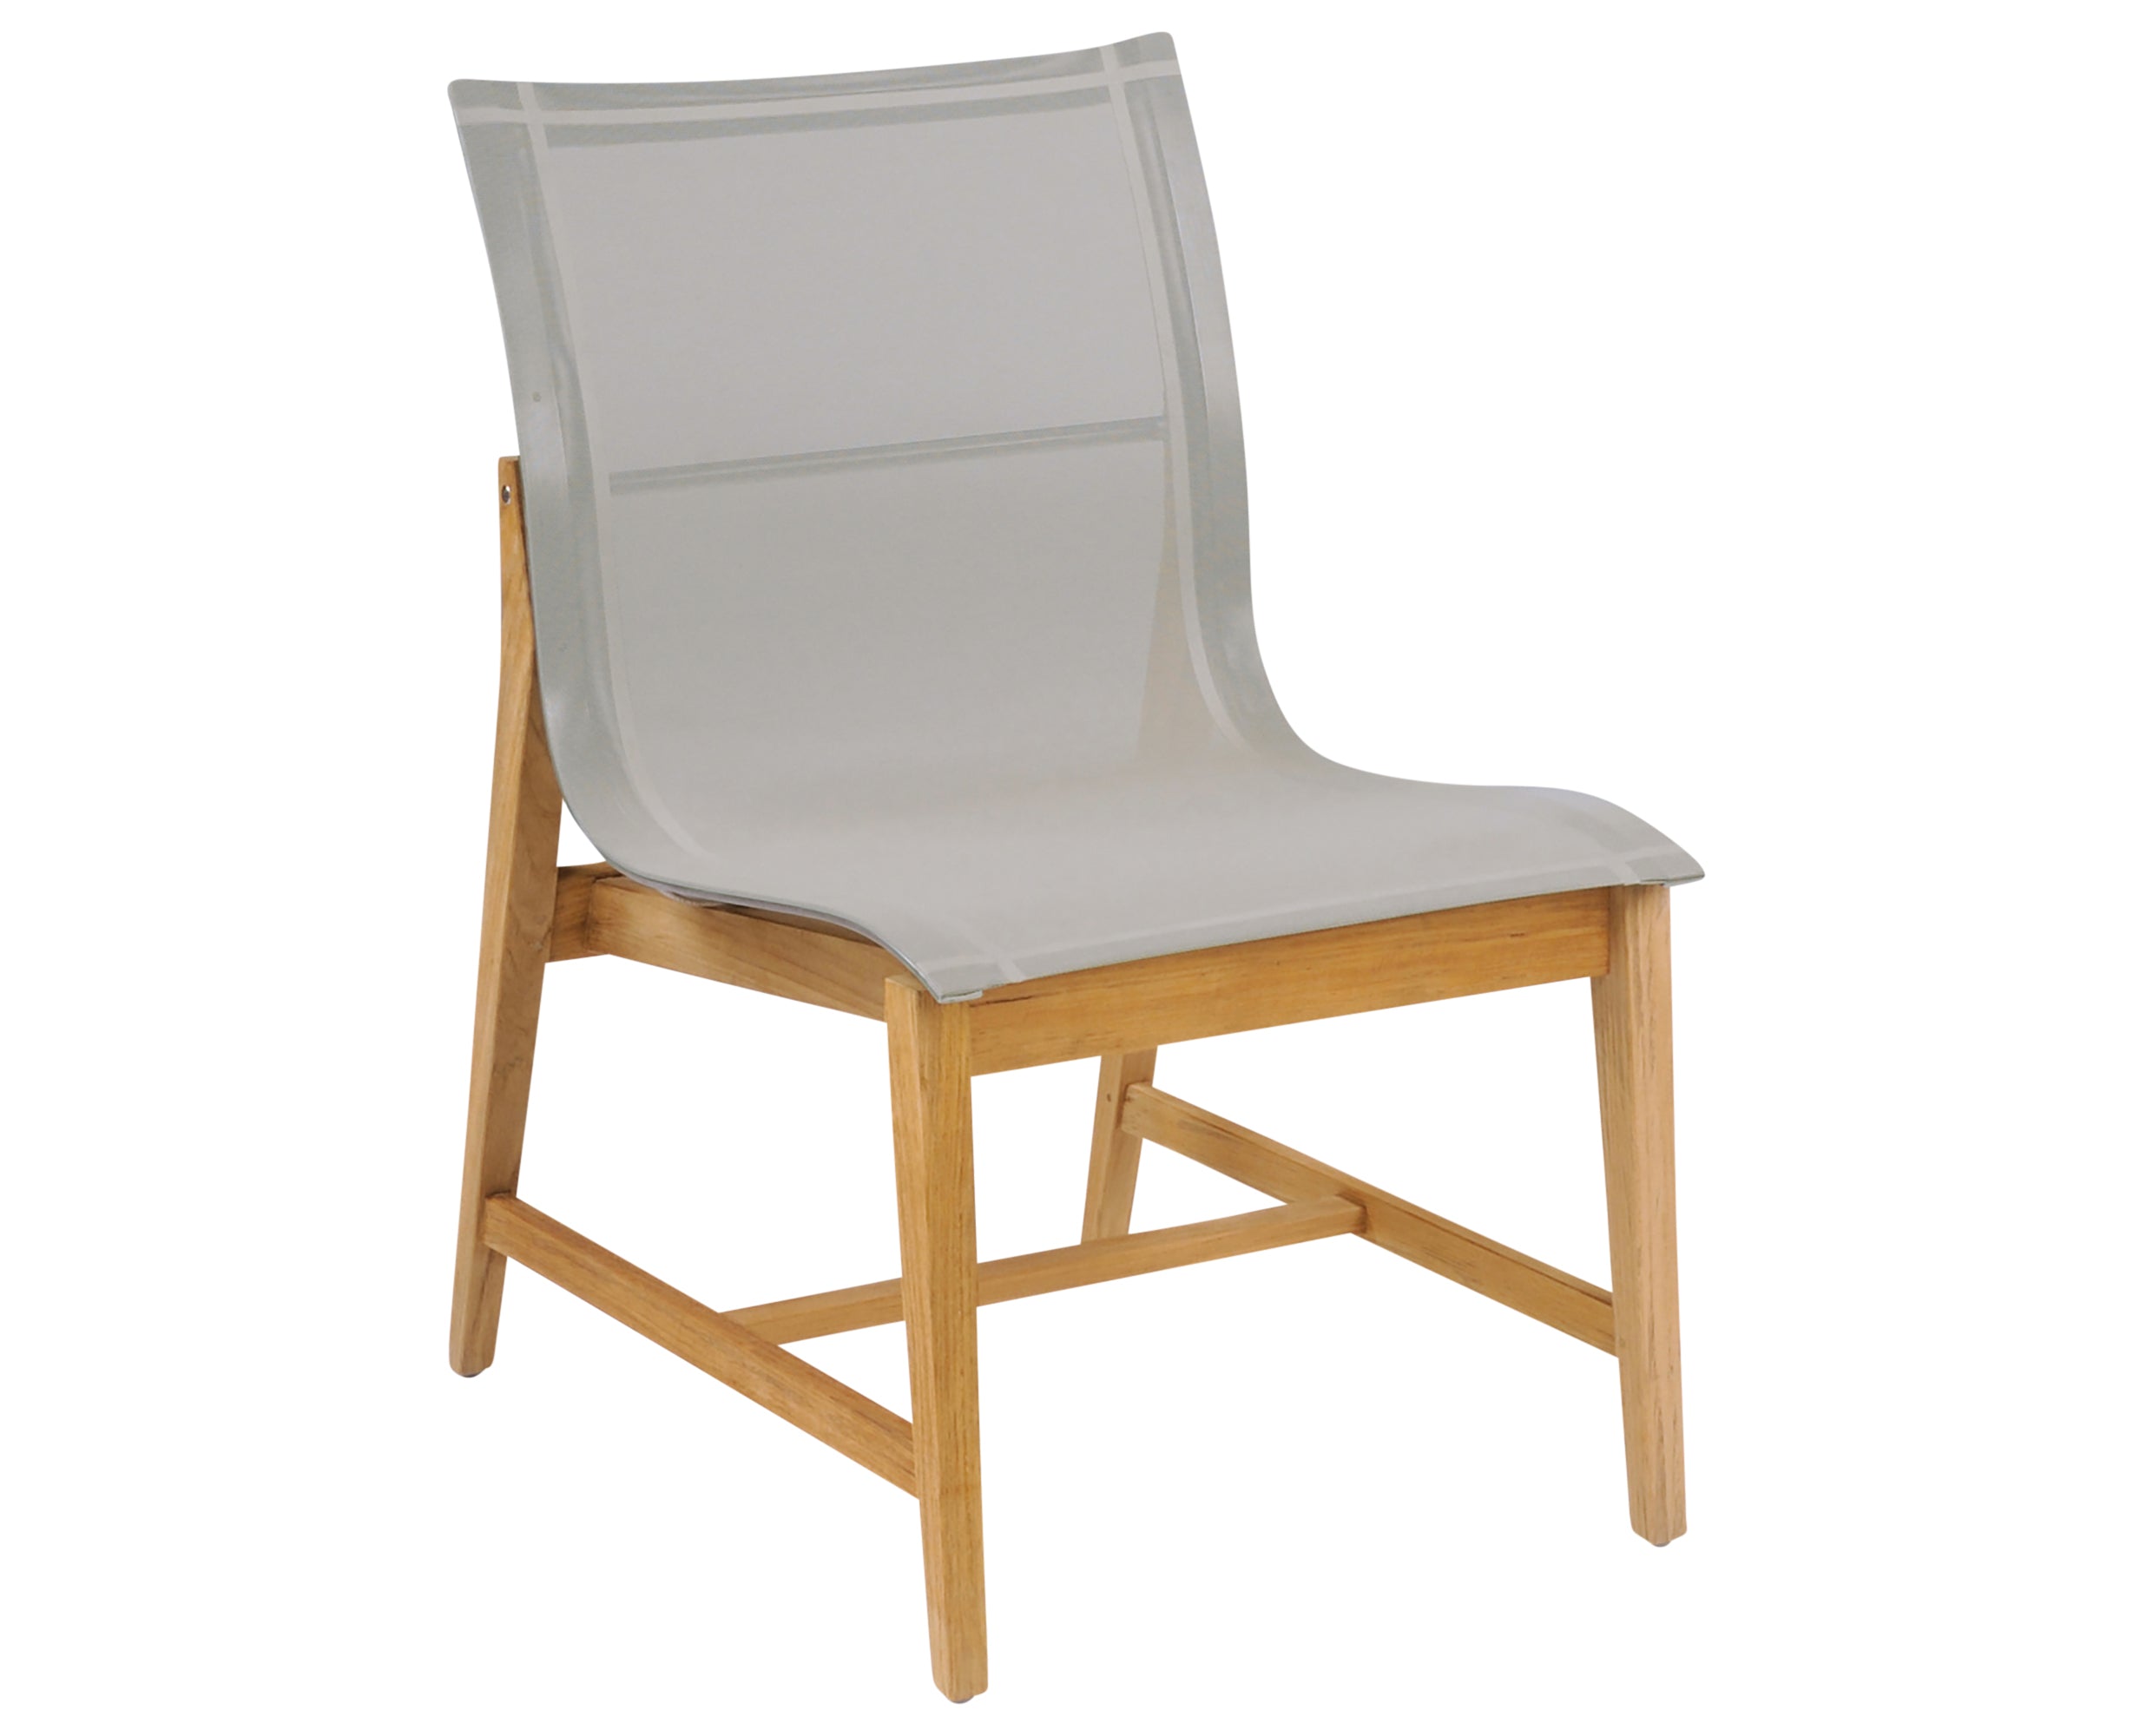 Dining Side Chair | Kingsley Bate Marin Collection | Valley Ridge Furniture